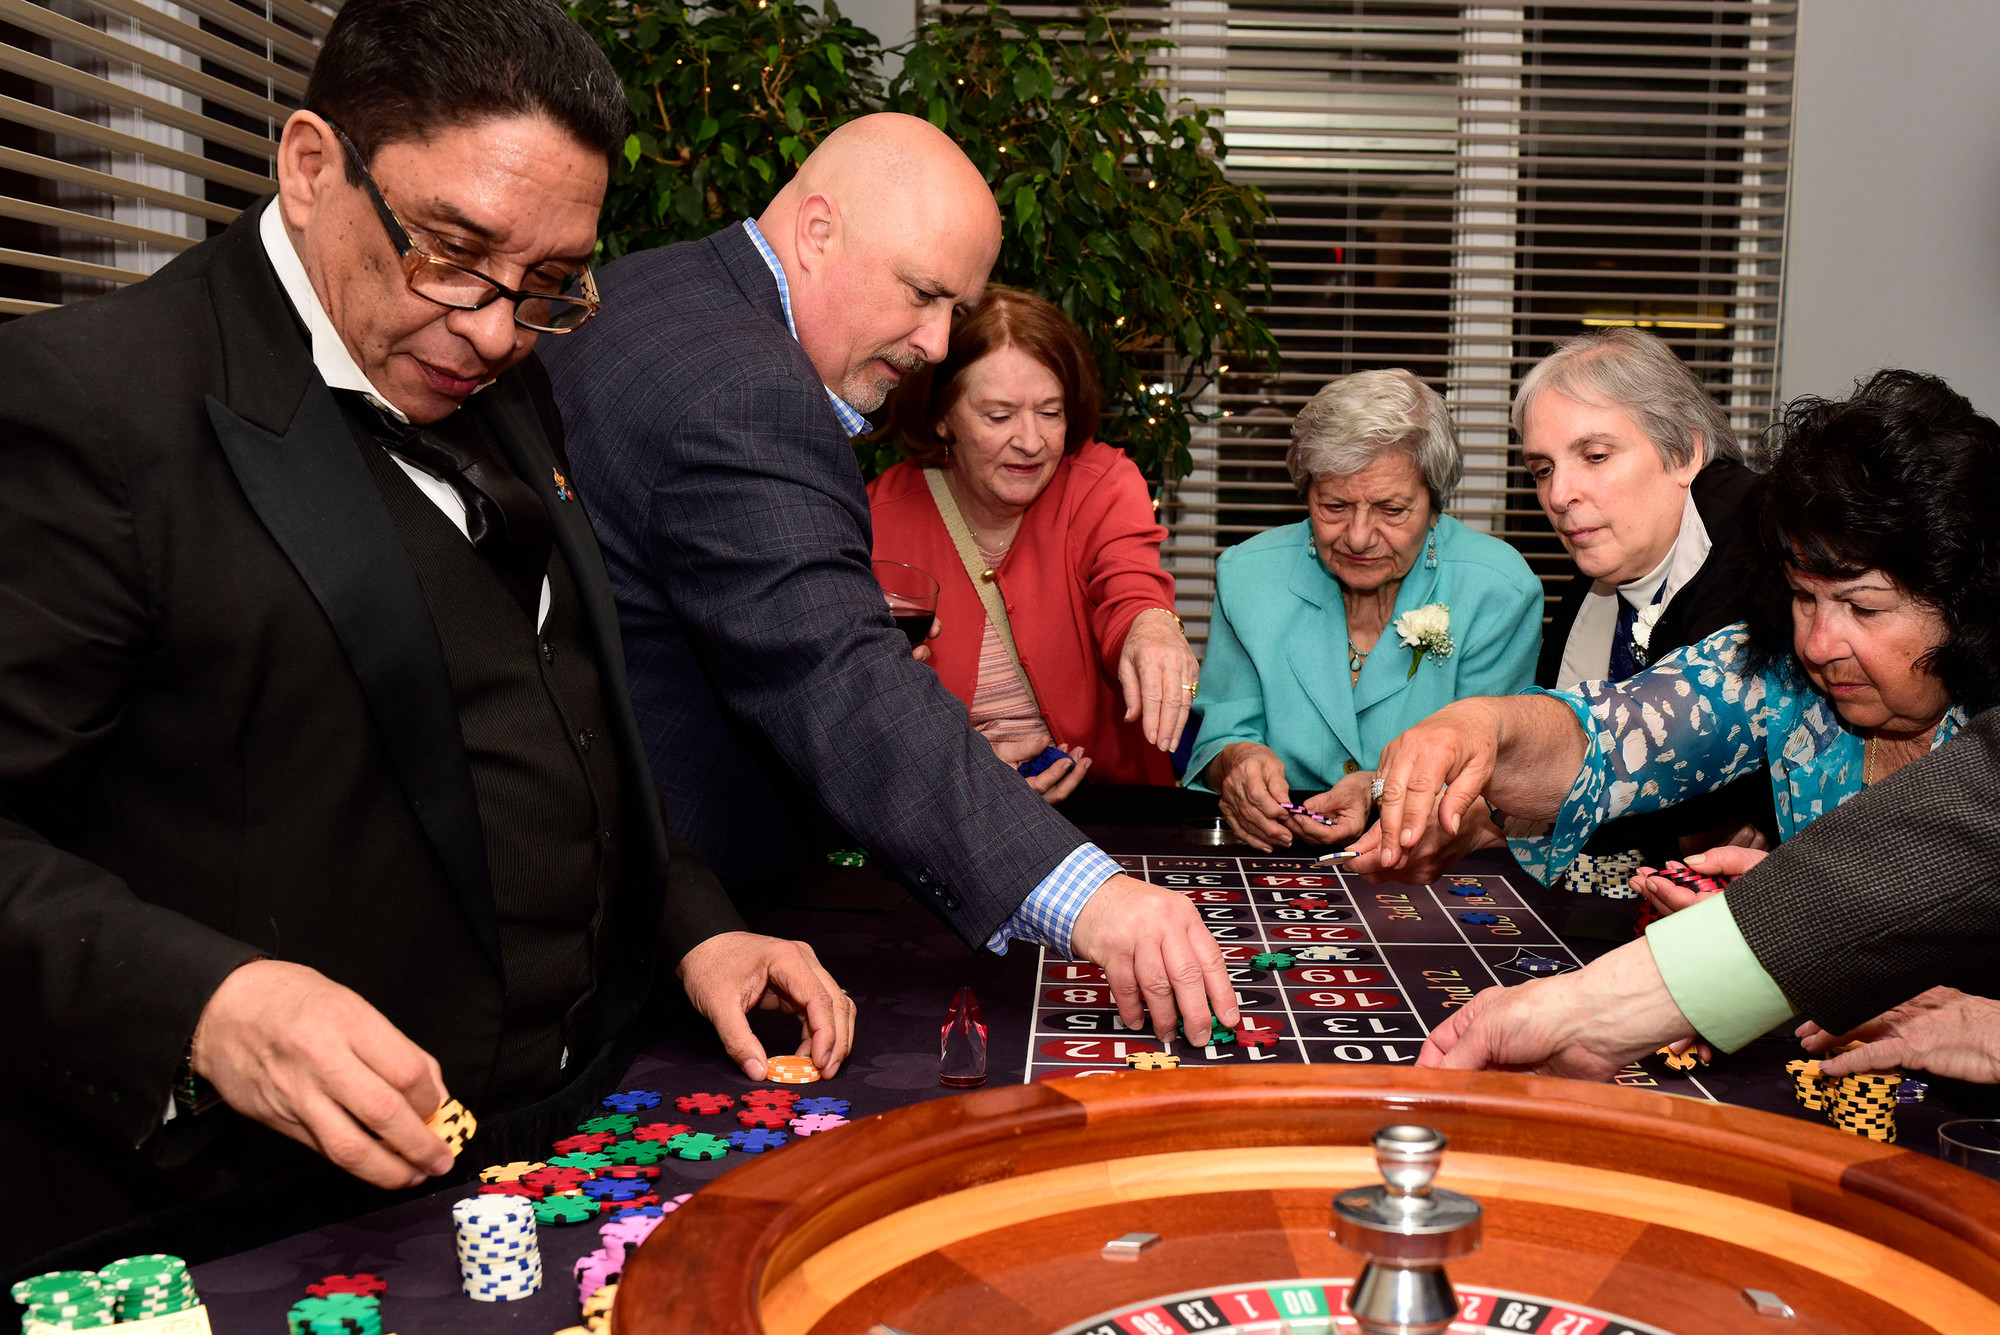 The Sandel Center was crowded on April 25 for the annual FOSSI Monte Carlo night, which raised money for the senior center and honored Margarita Grasing, director of the Hispanic Brotherhood of Rockville Centre.